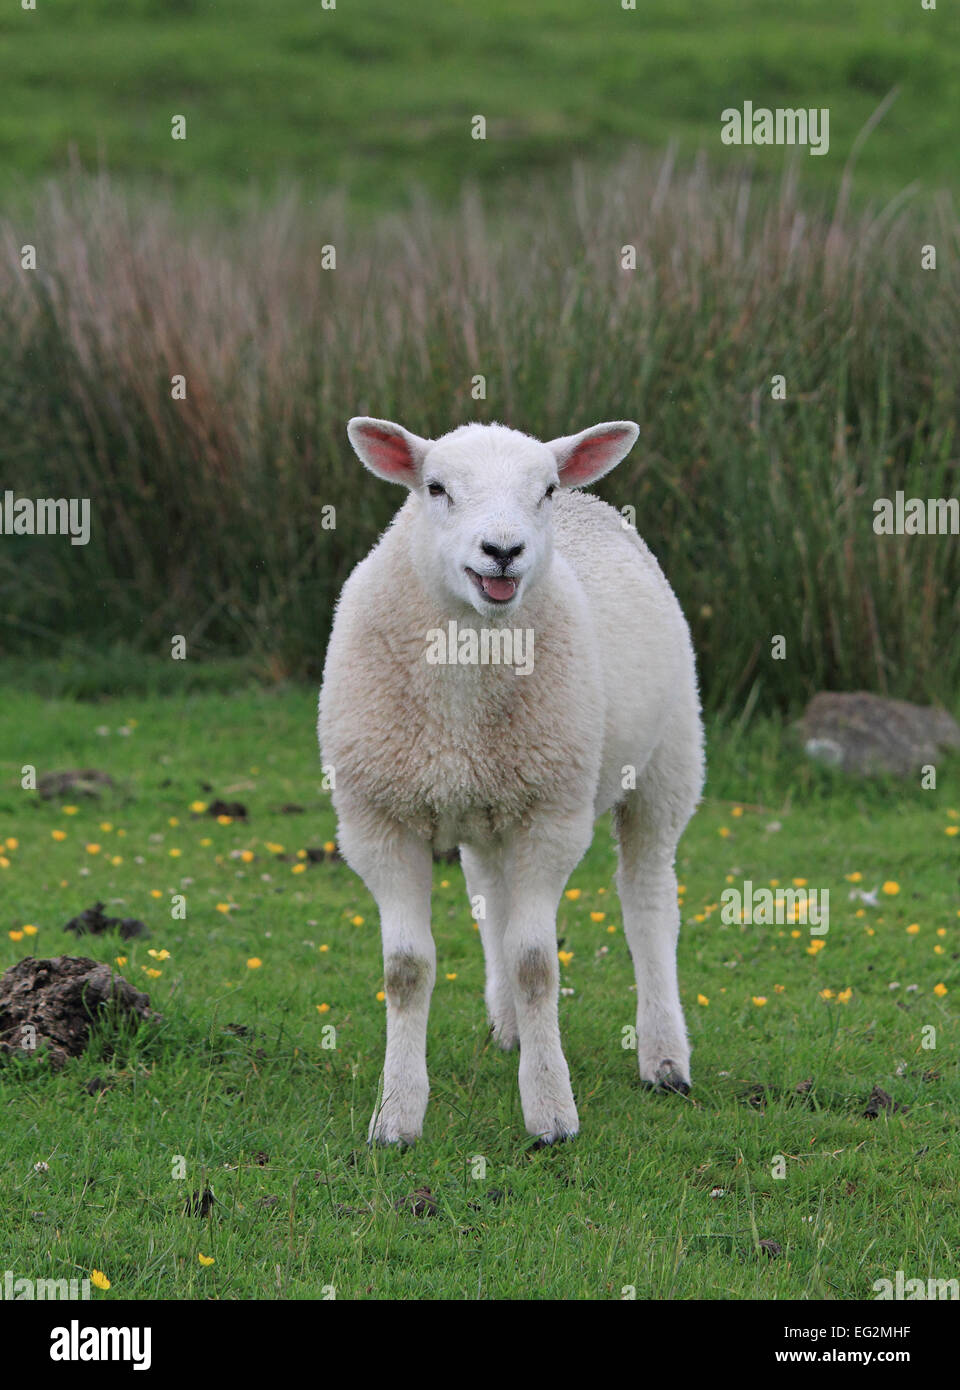 Sheep calling for its family, looking towards the camera Stock Photo